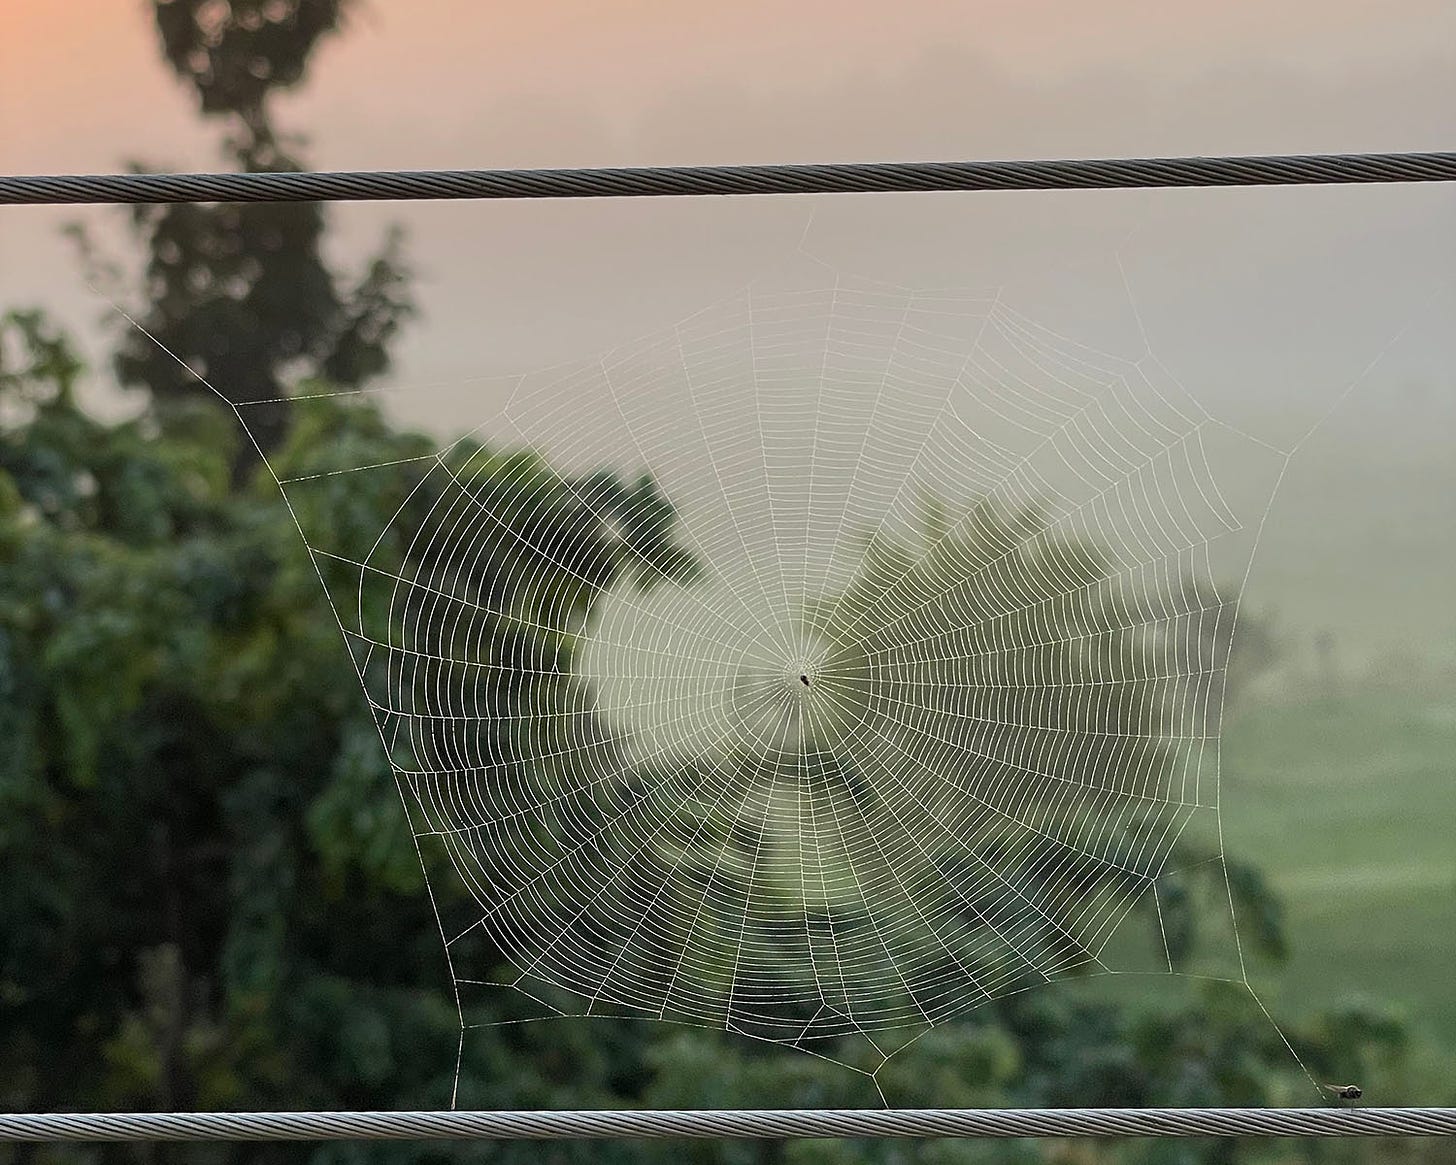 Image of a spider web at dawn with green shrubs and a orange misty dawn in the background.